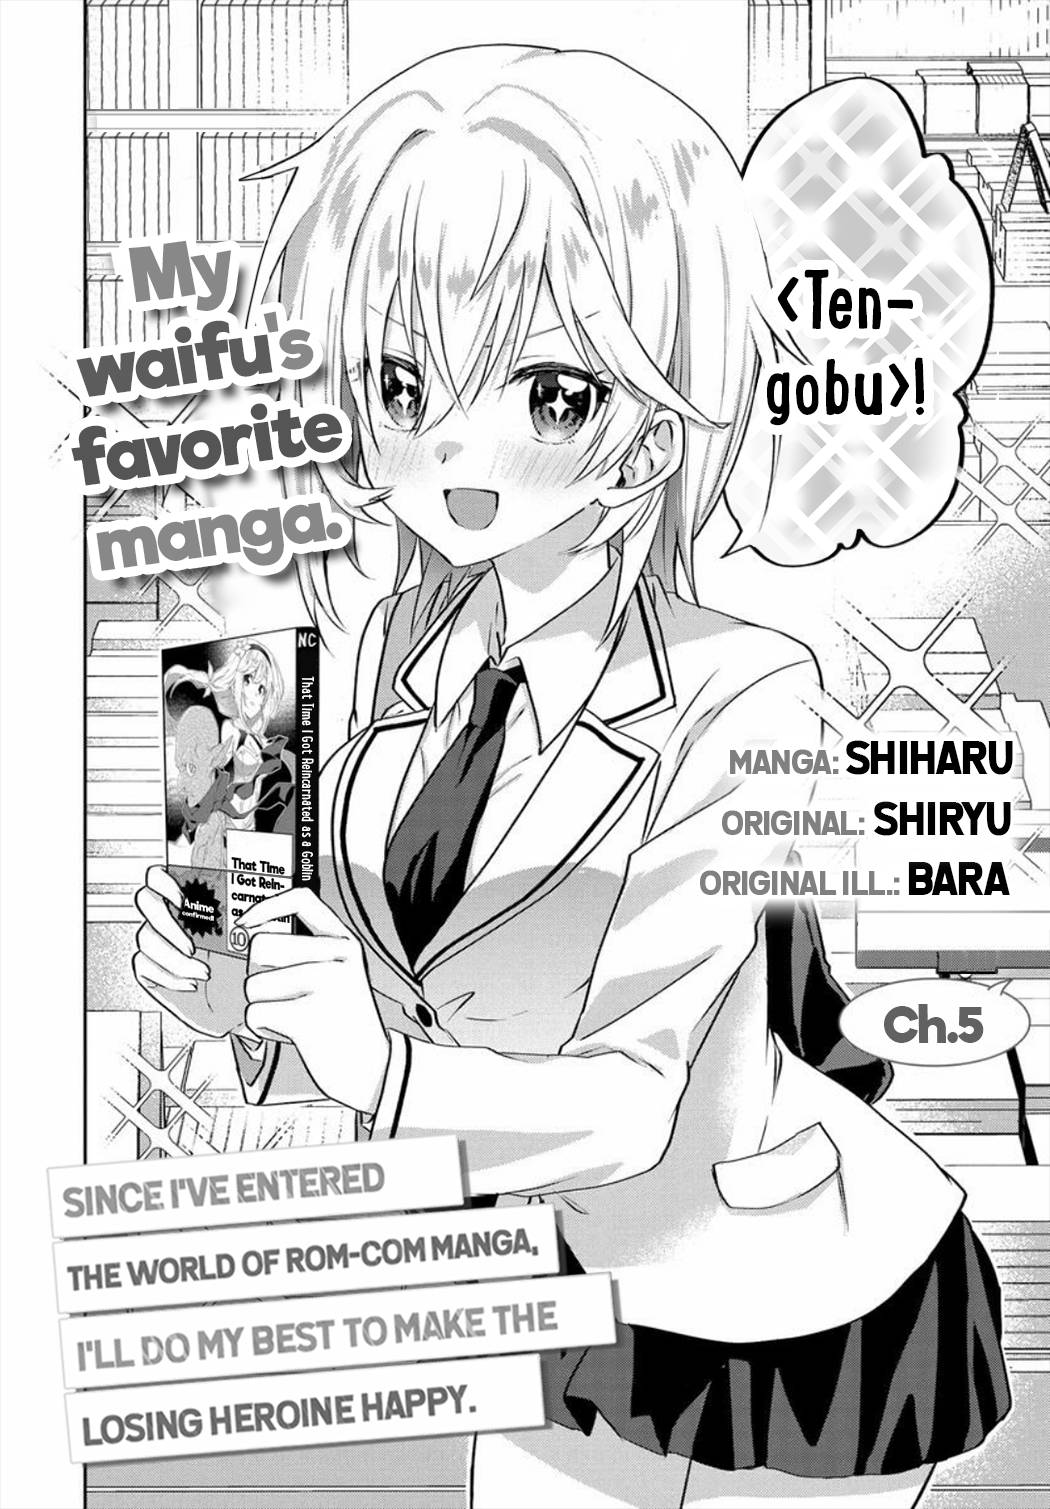 Since I’ve Entered the World of Romantic Comedy Manga, I’ll Do My Best to Make the Losing Heroine Happy. - chapter 5.1 - #2